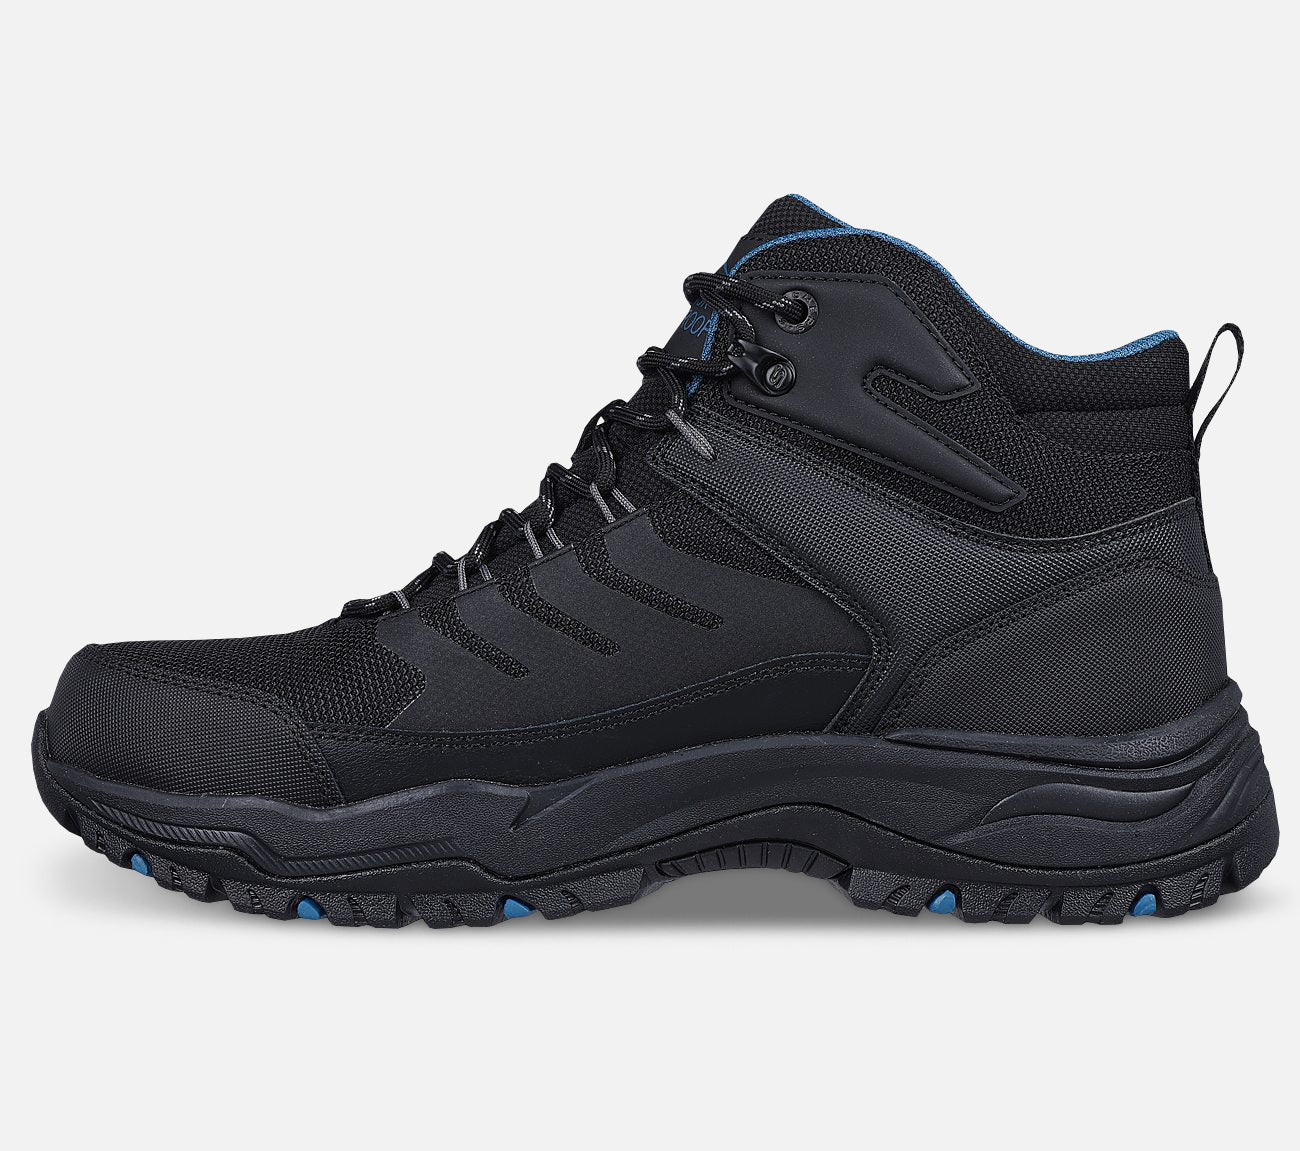 Relaxed Fit:  Arch Fit Dawson - Waterproof Boot Skechers